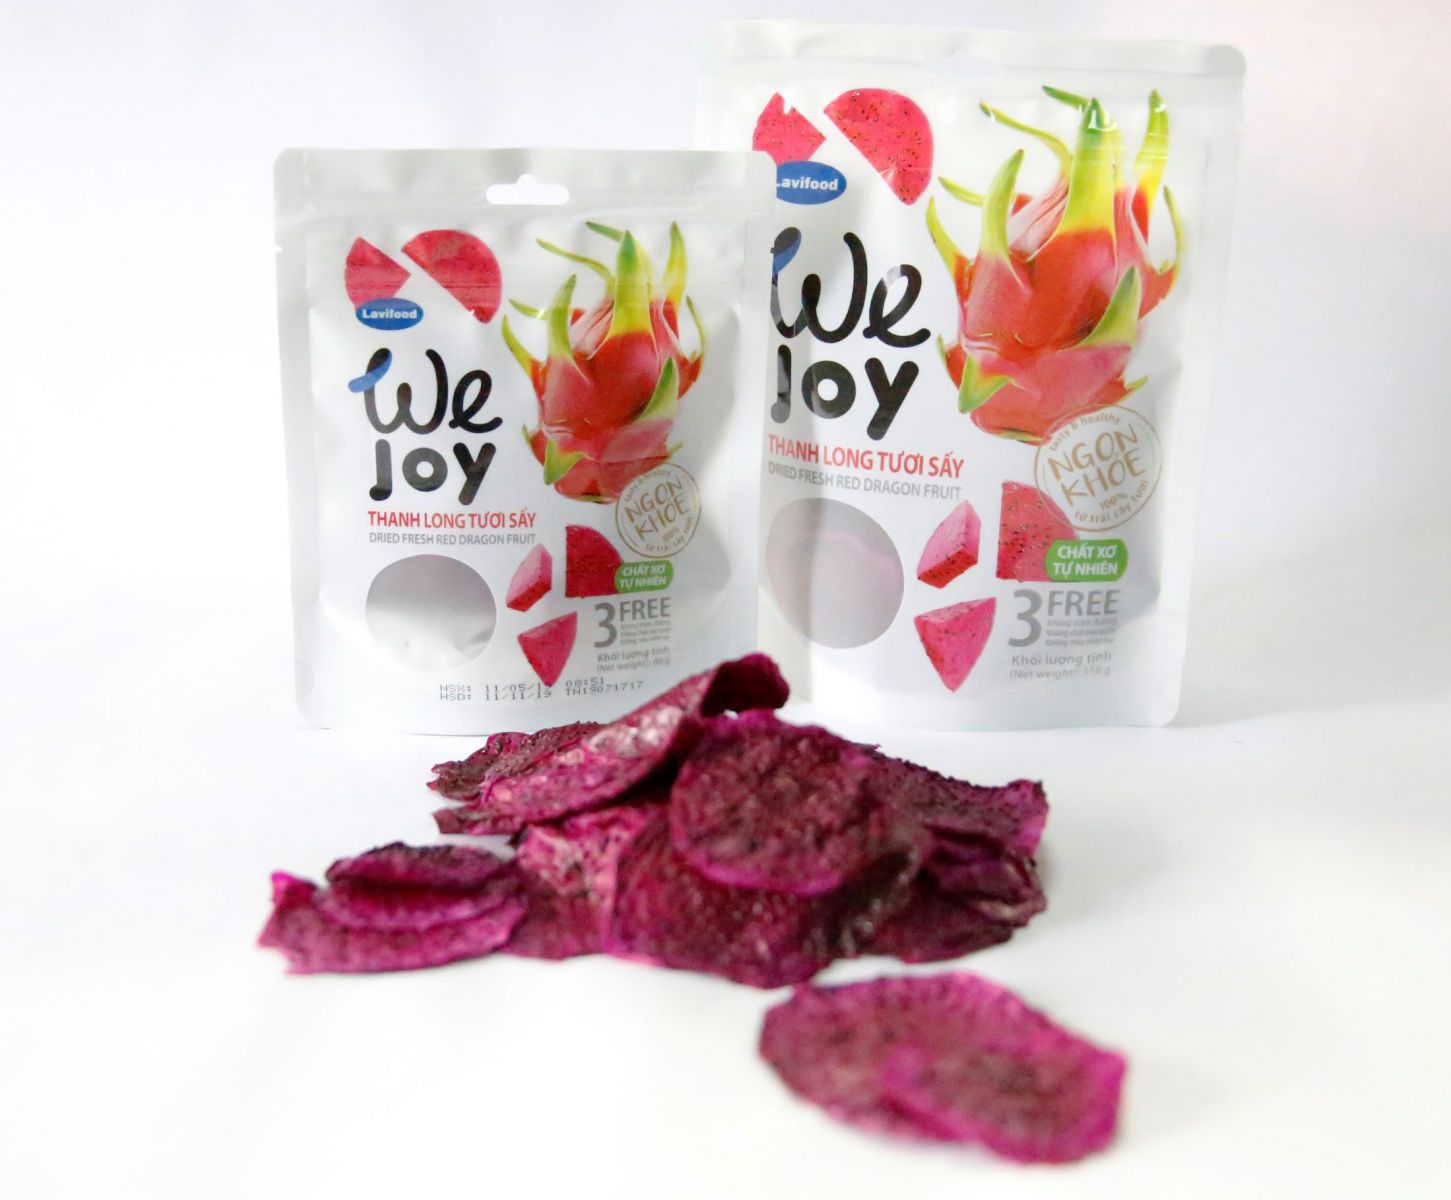 http://www.lavifood.com/en/products/dried-fruit-vegetables/we-joy-dried-red-dragon-fruit